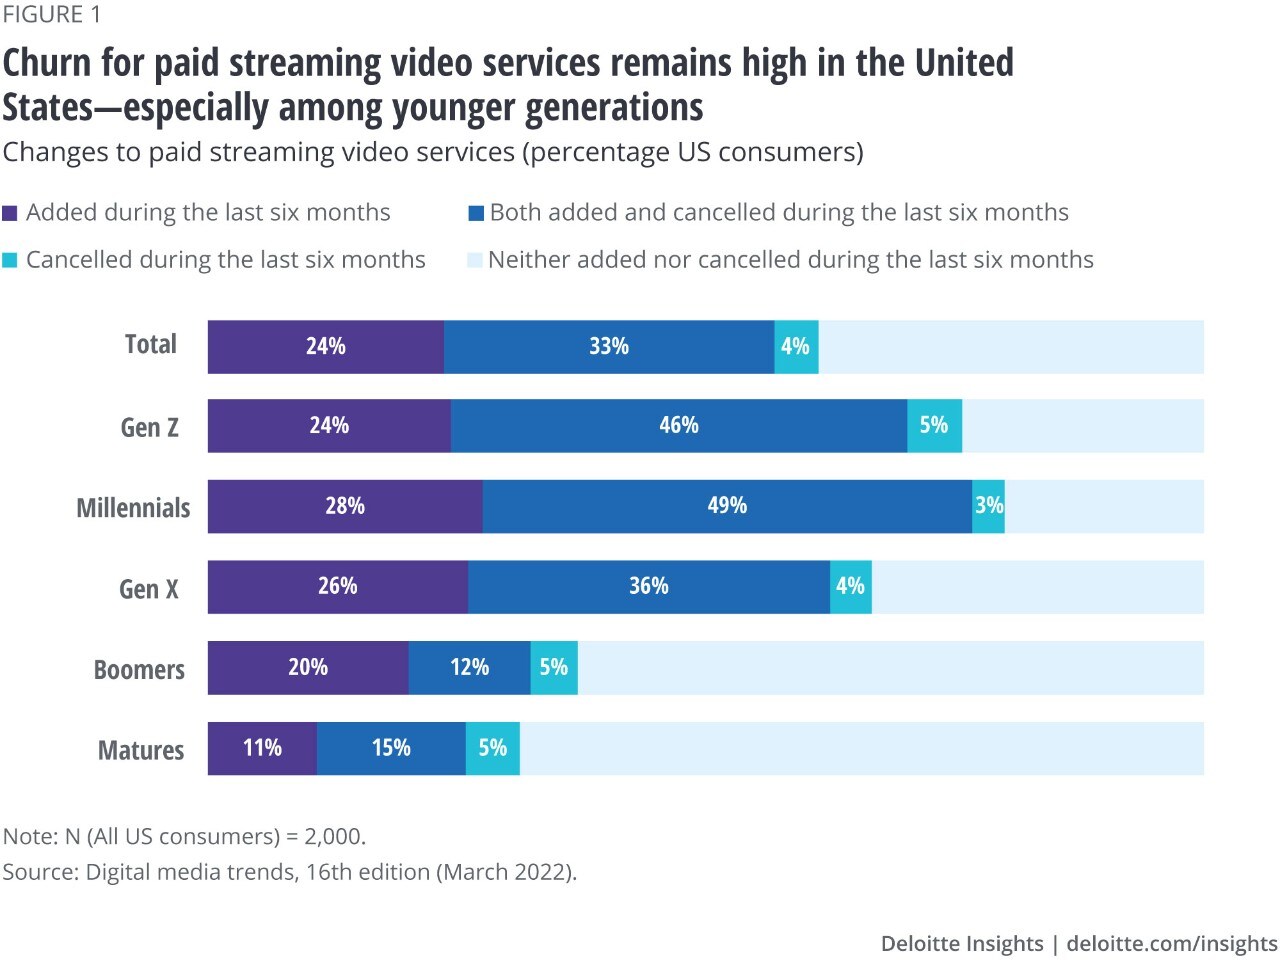 Figure 1. Churn for paid video streaming services remains high in the US—especially among younger generations